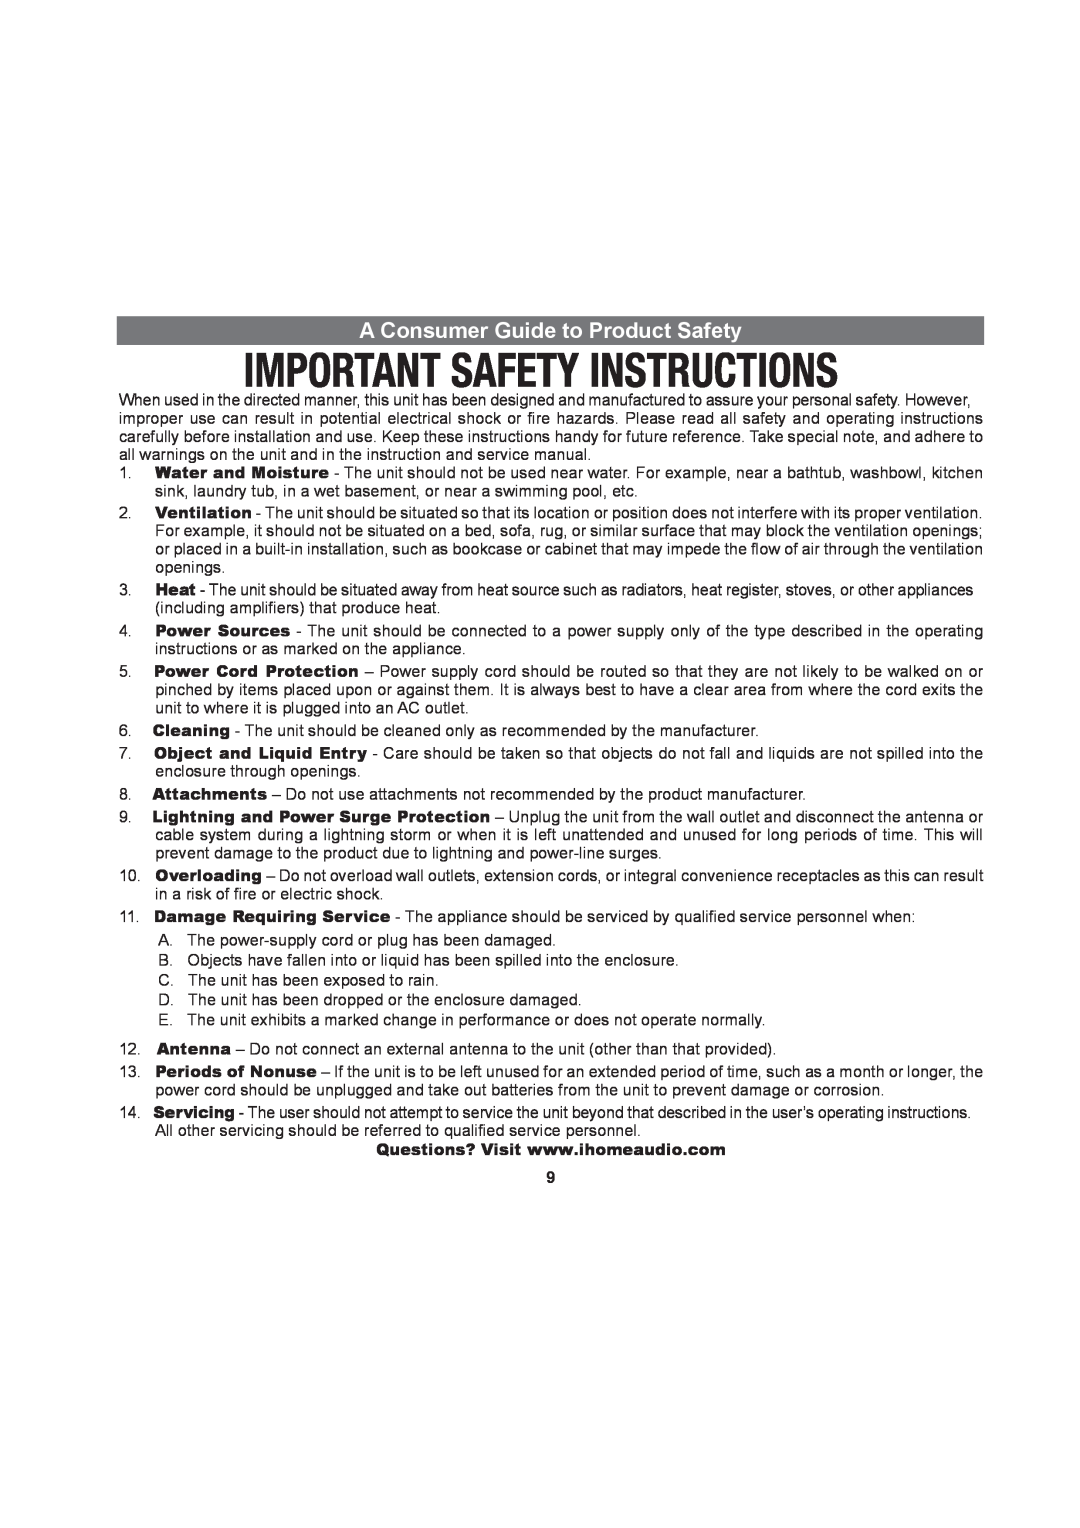 iHome iHC5 manual A Consumer Guide to Product Safety 